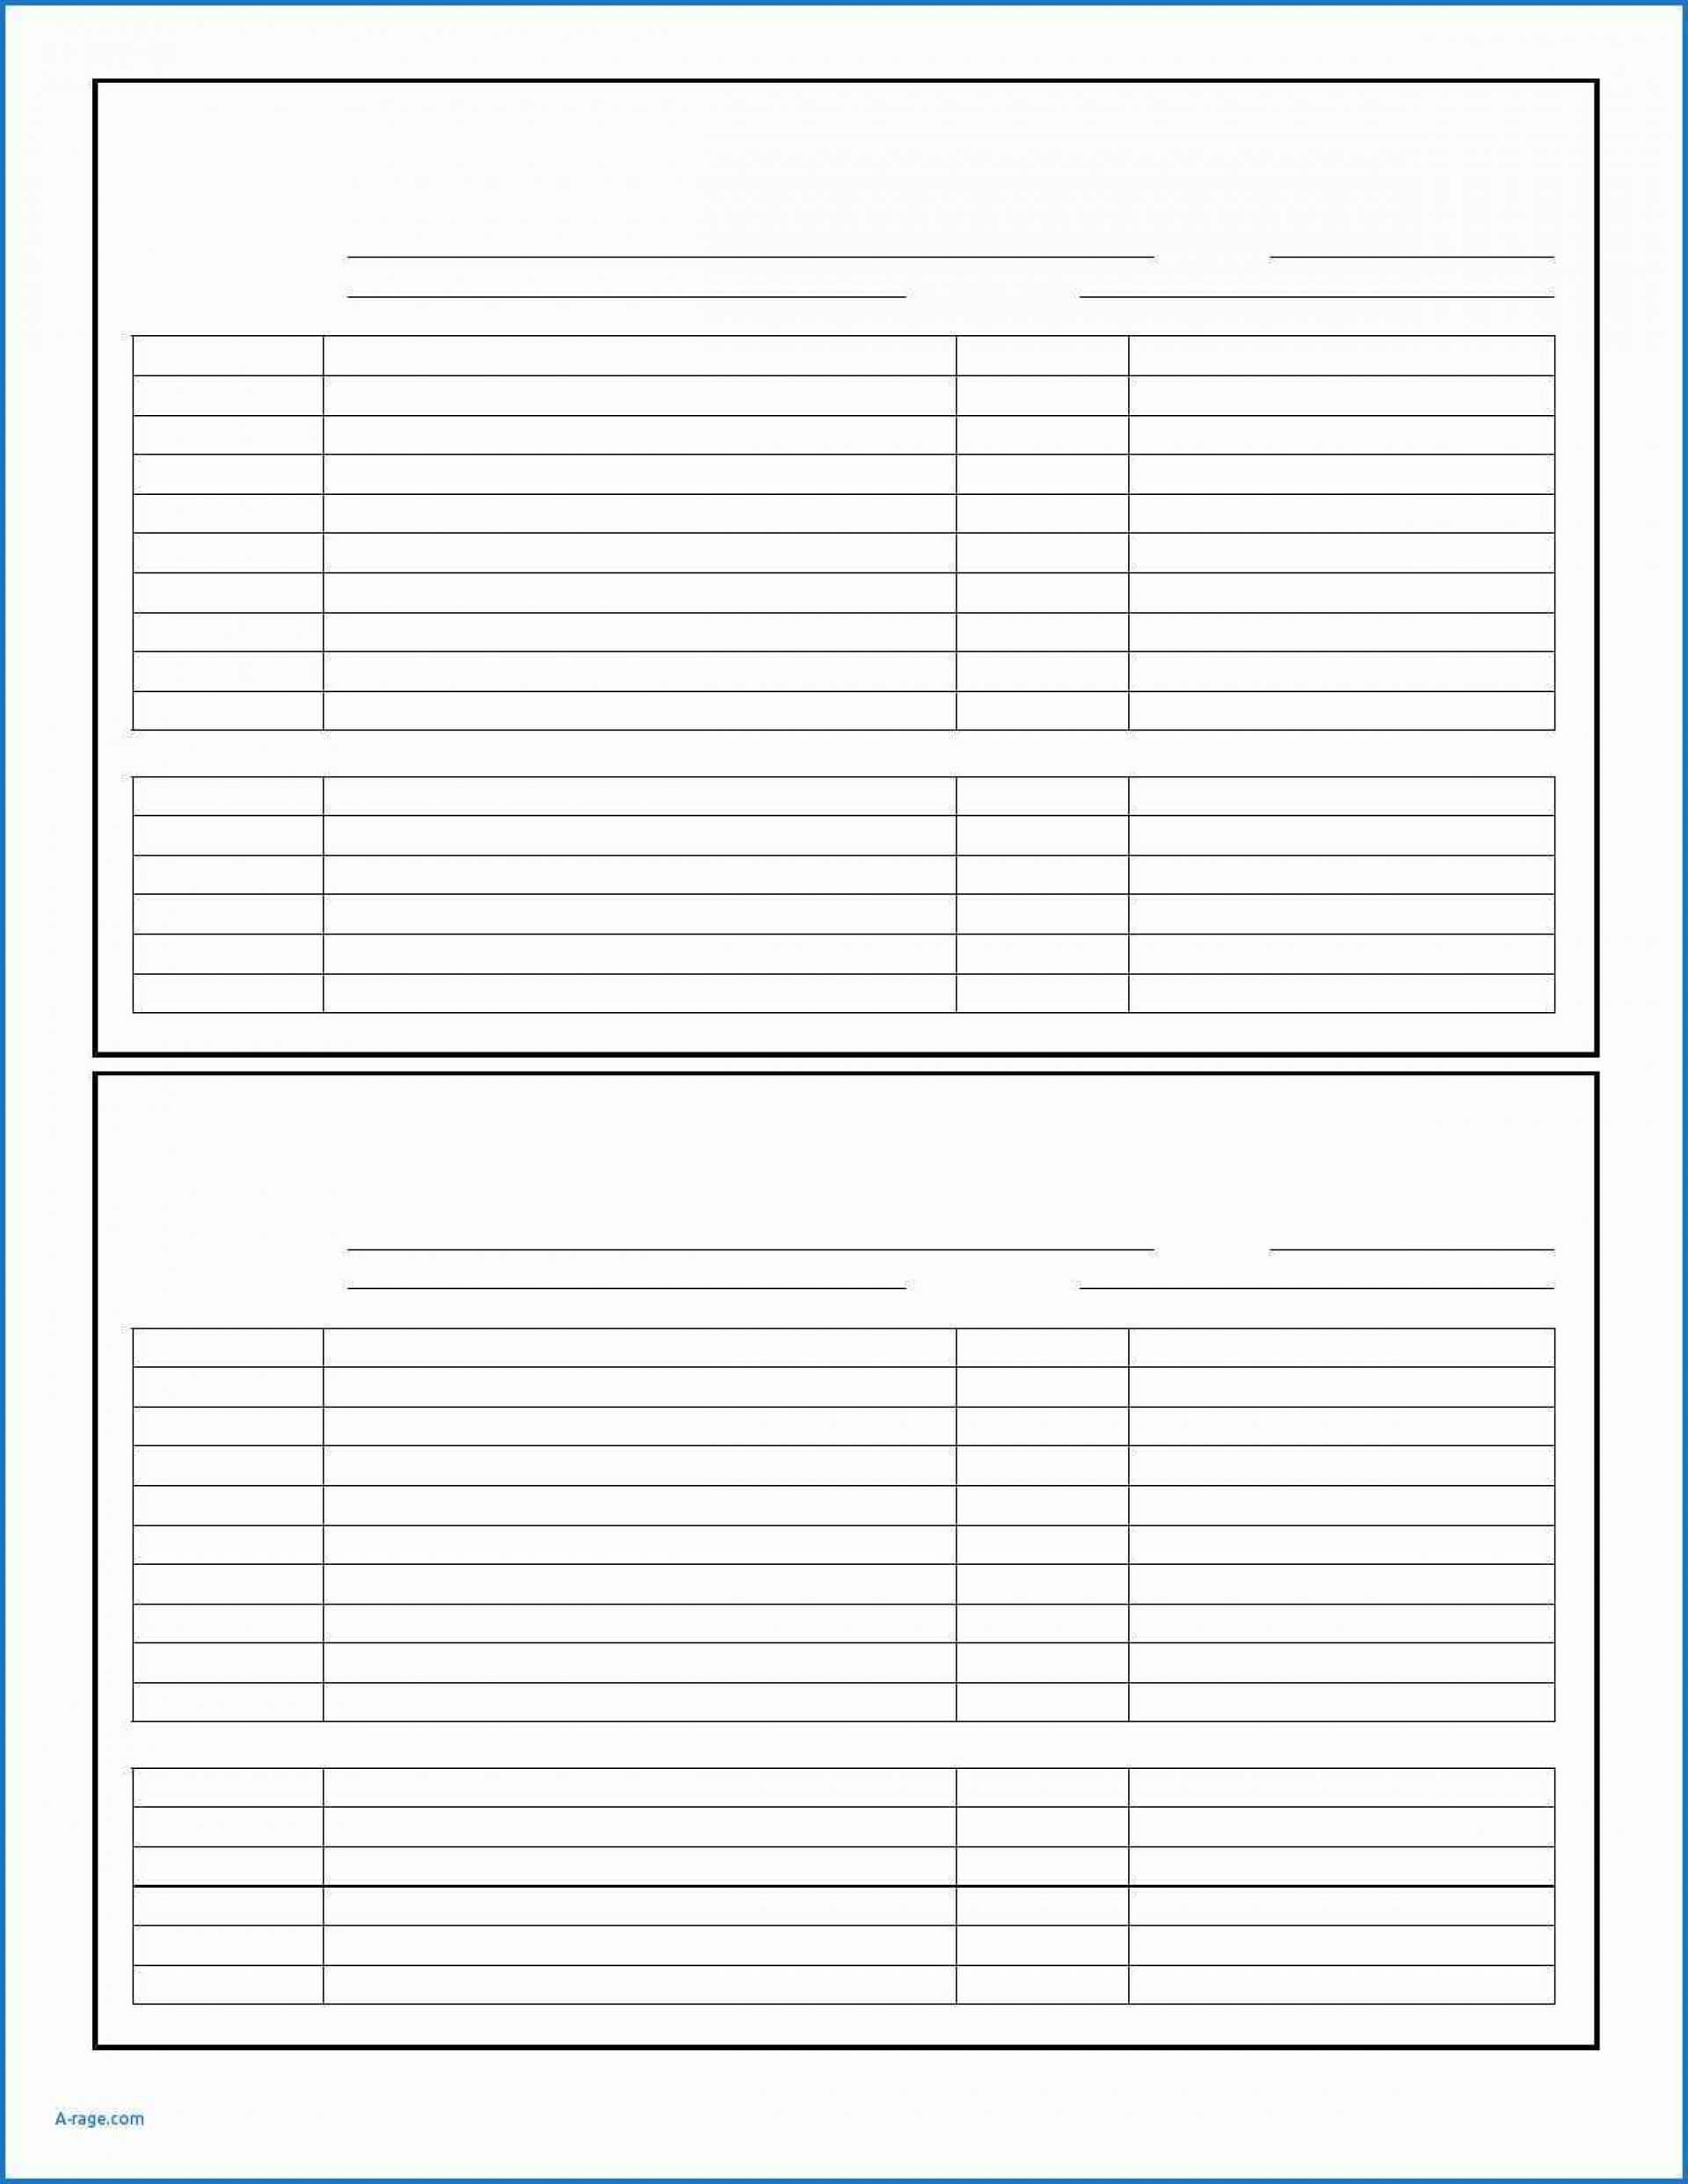 040 Fillable And Fastpitch Softball Lineup Cards Baseball With Softball Lineup Card Template